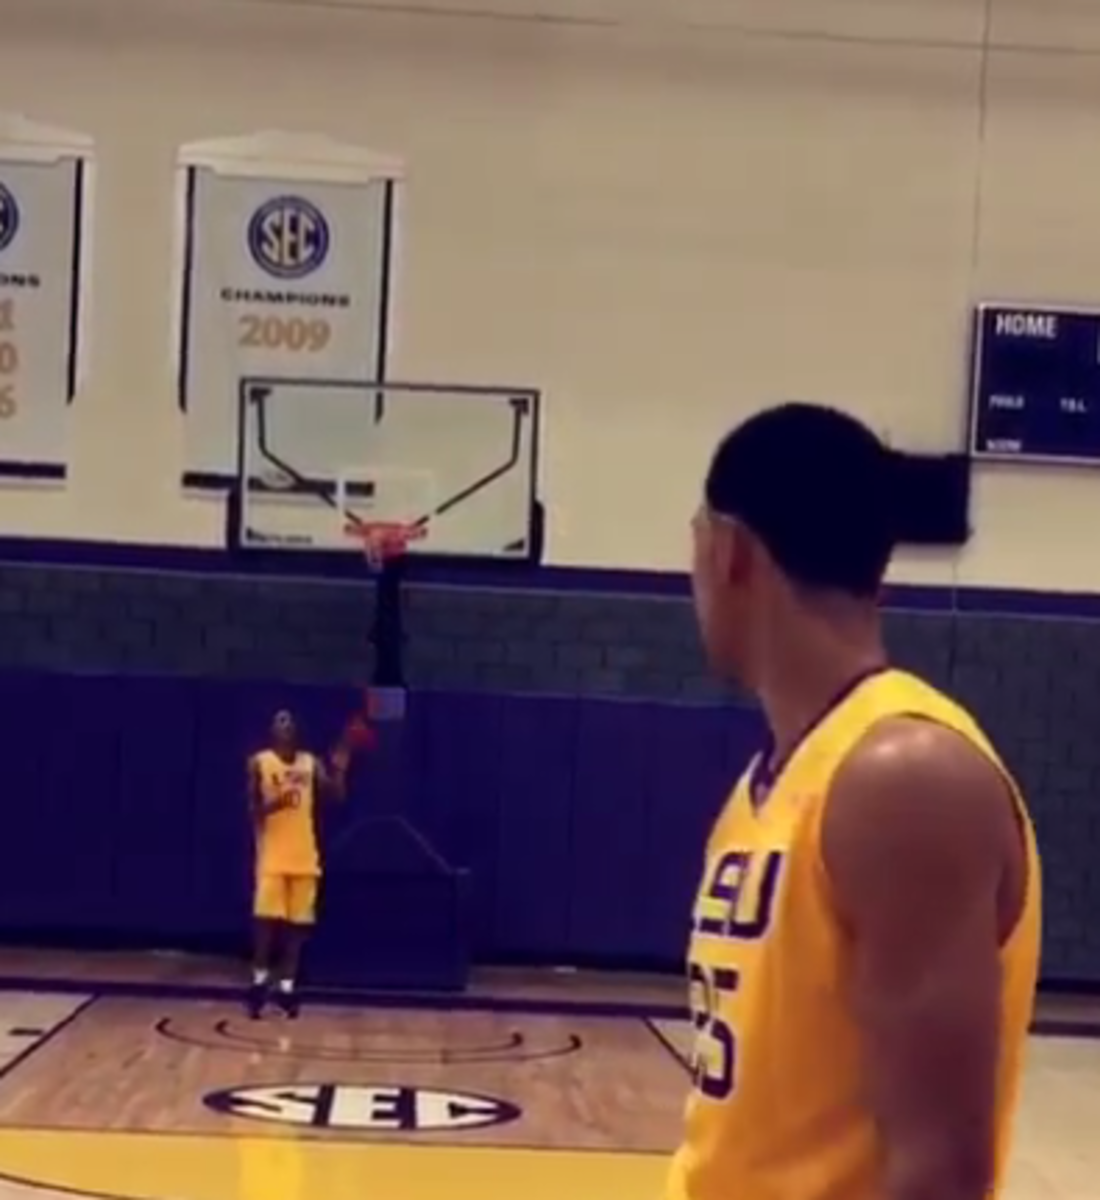 Ben Simmons makes a ridiculous shot in practice.